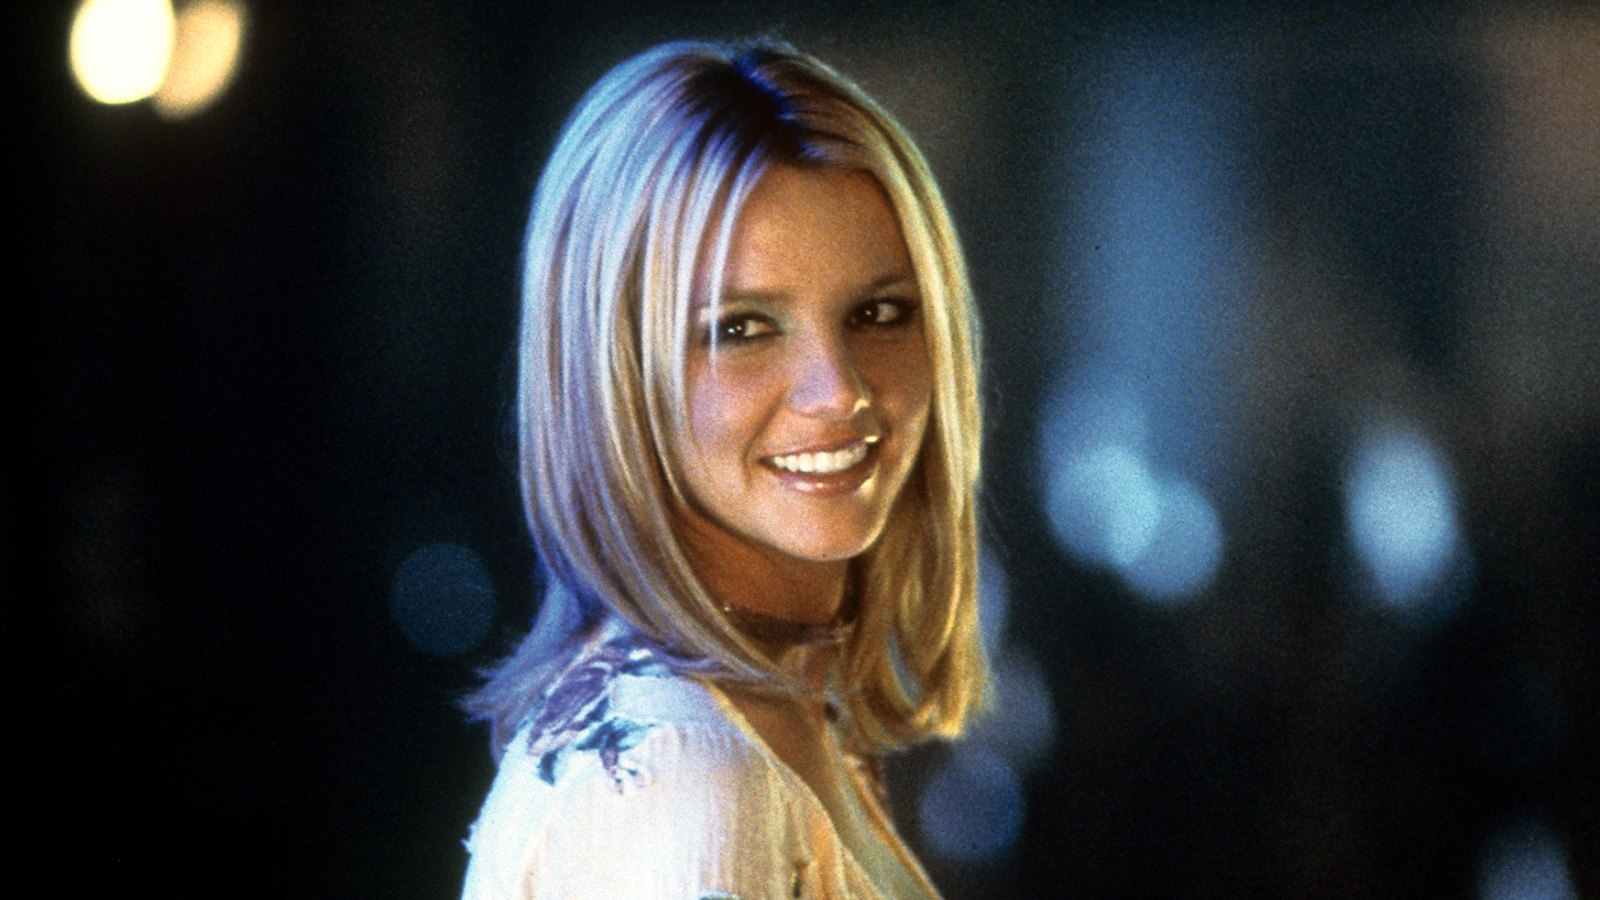 'Crossroads' Director Says Britney Spears Fought for Sex Scene to Challenge 'Forever Virgin' Image